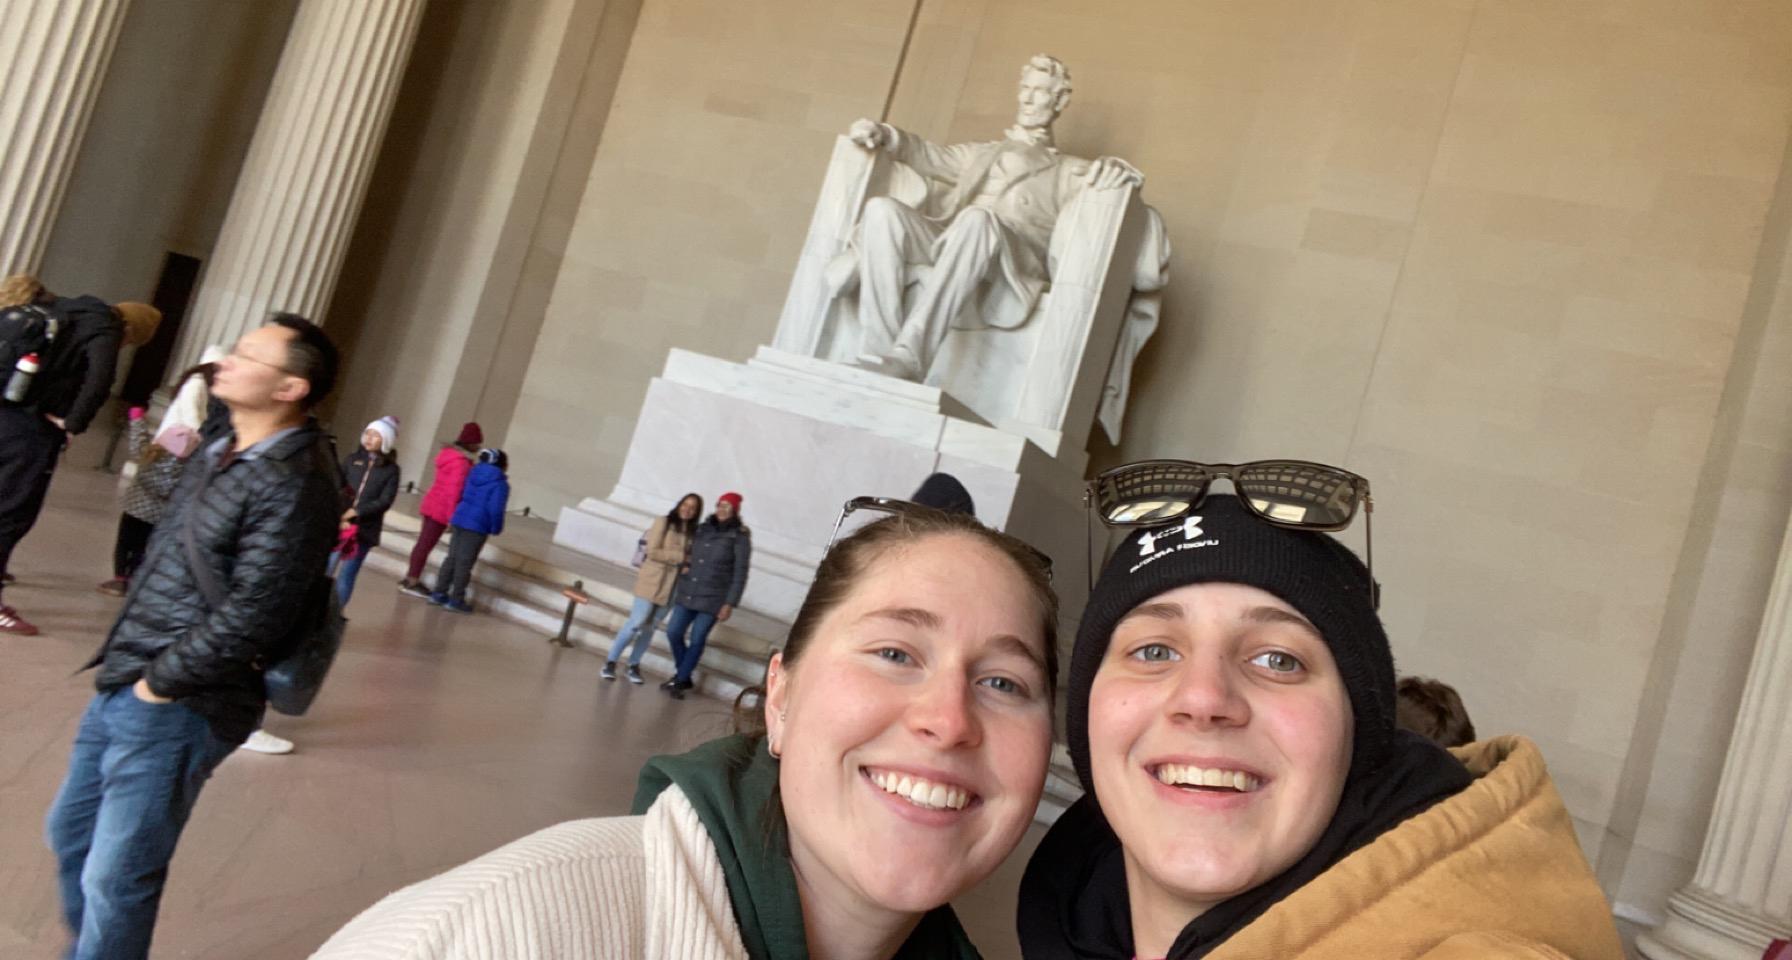 Our first trip to D.C.